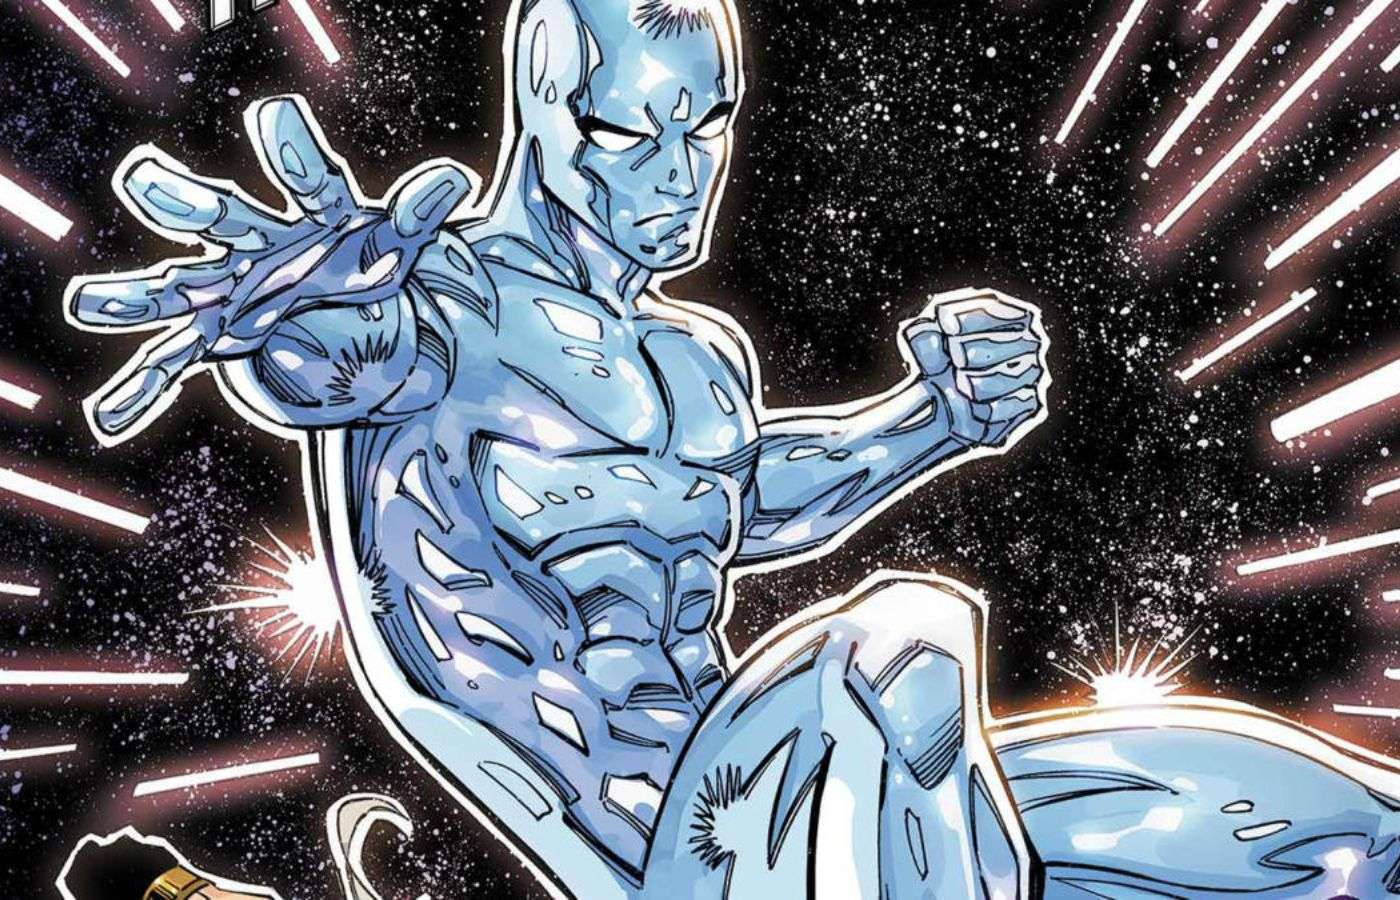 Fantastic Four character Silver Surfer could be gener-swapped in the movie